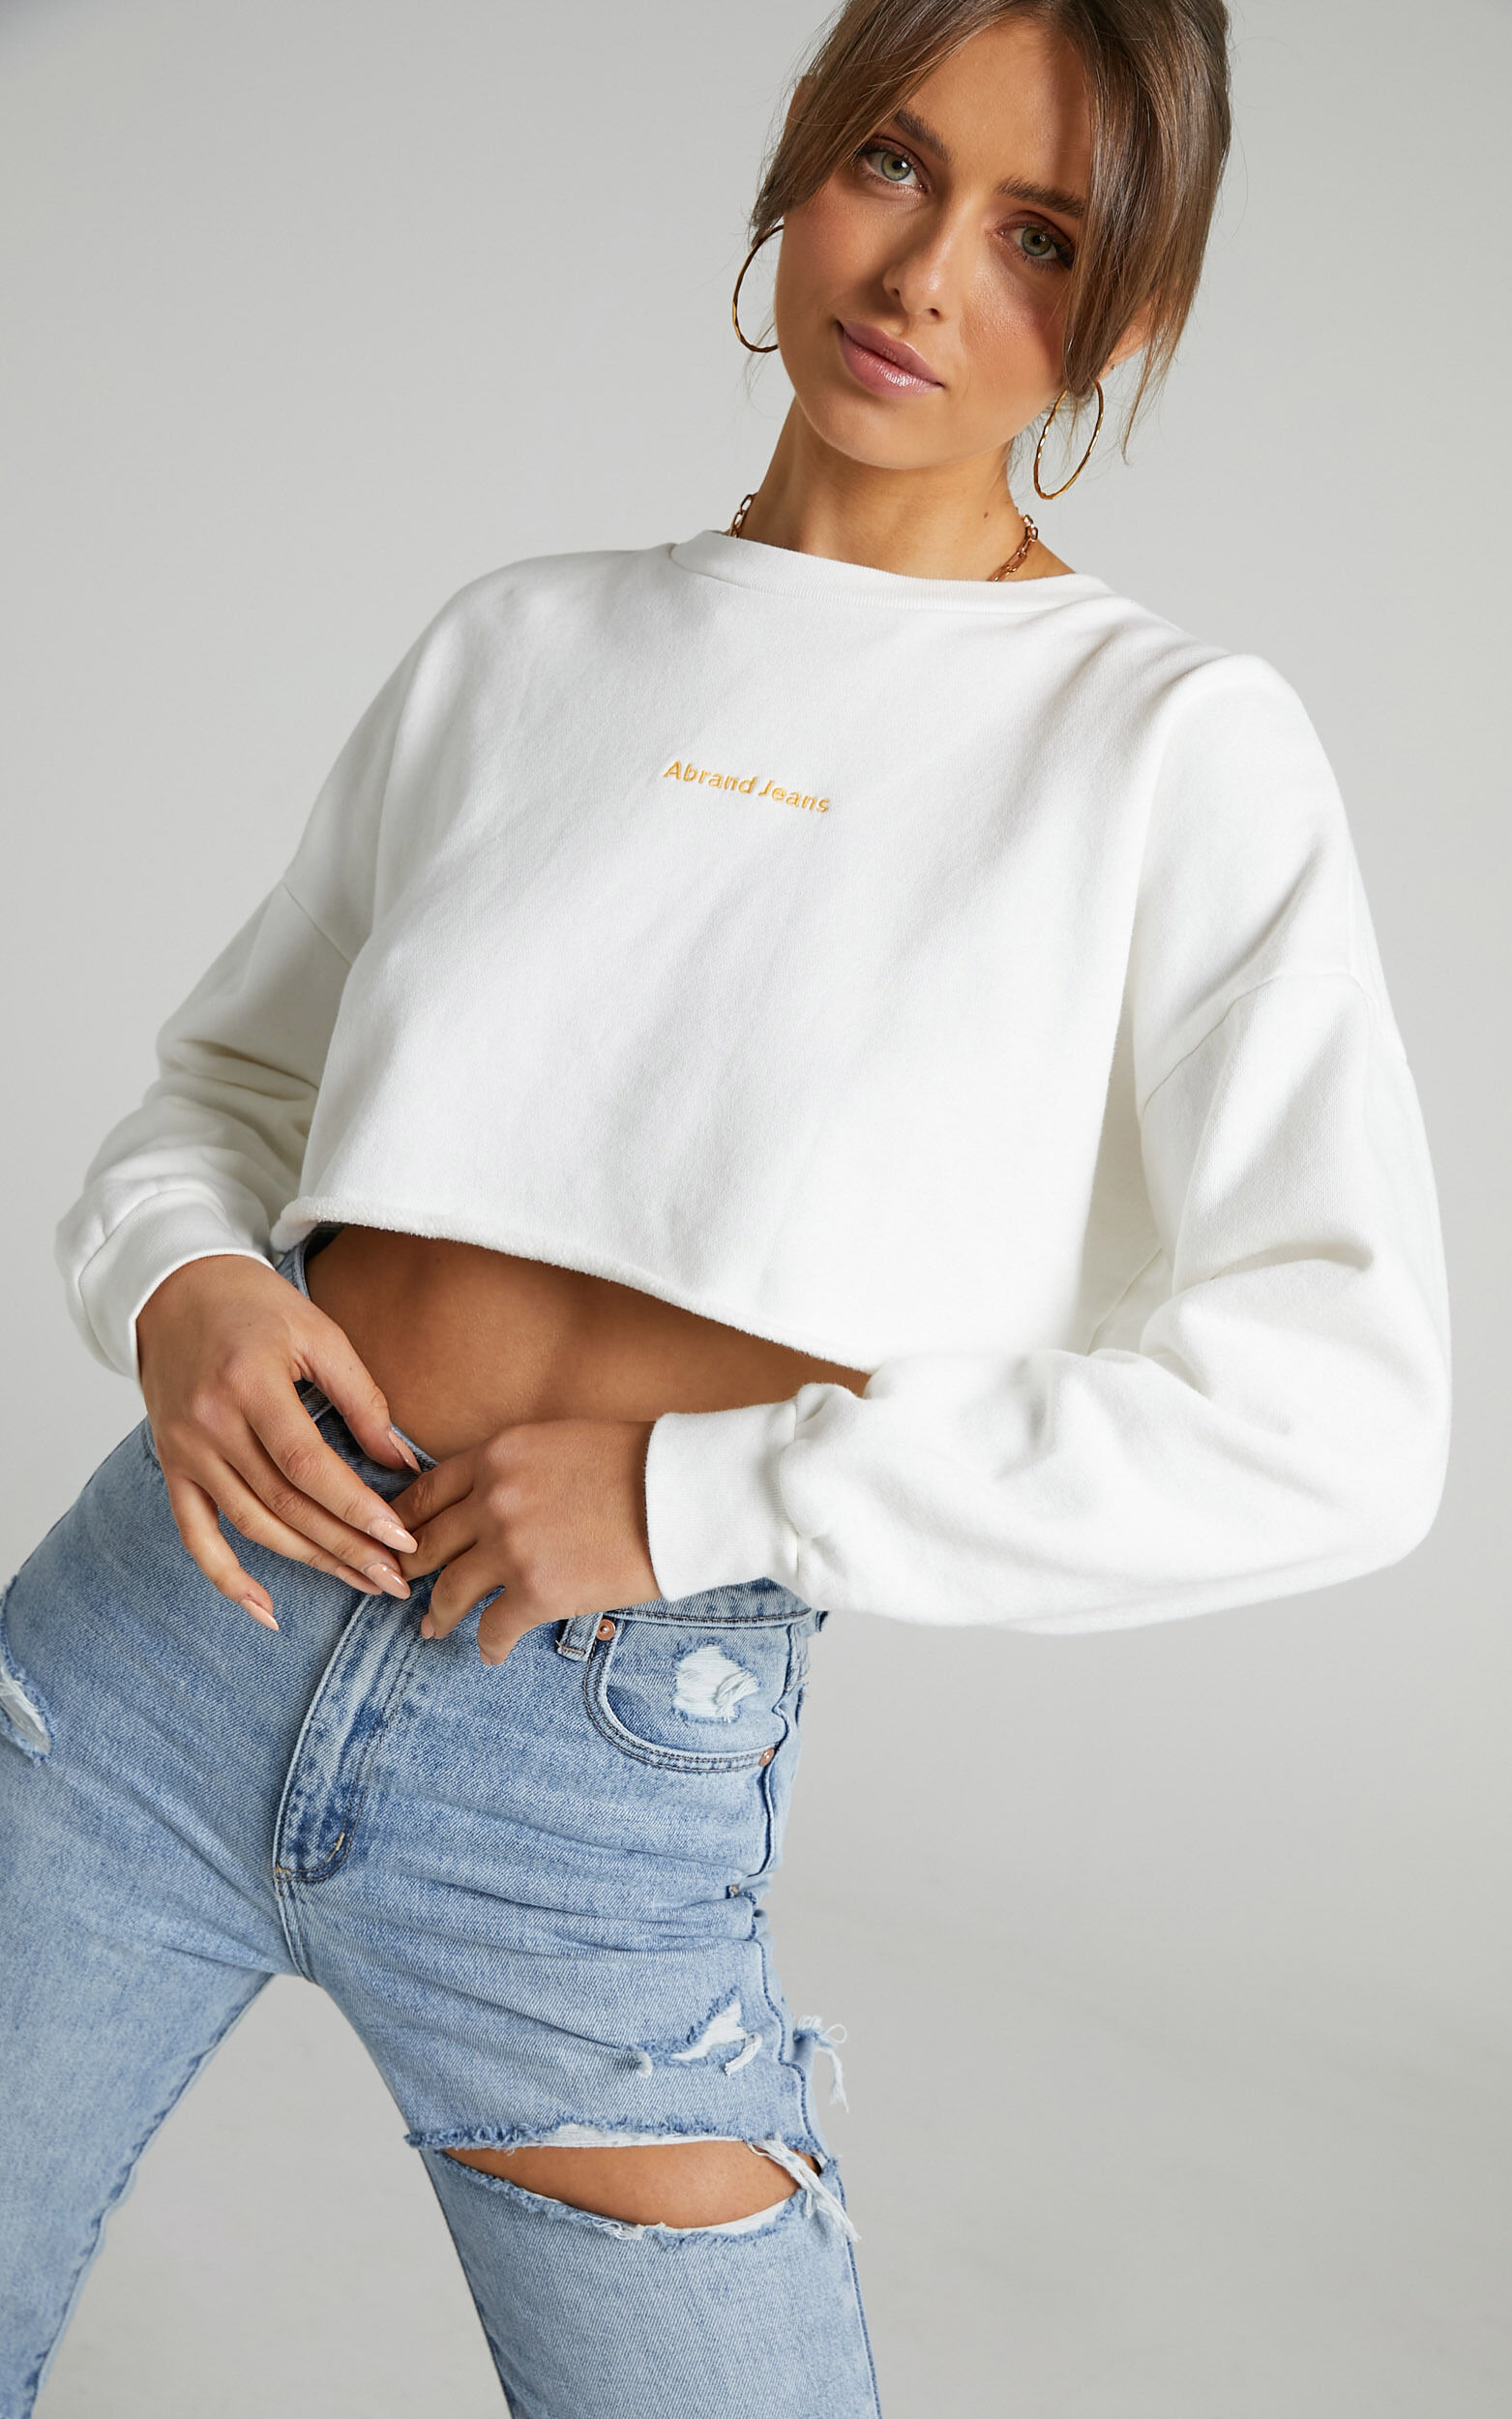 Abrand - A Cropped Oversized Sweater in White Sand - L, WHT1, super-hi-res image number null